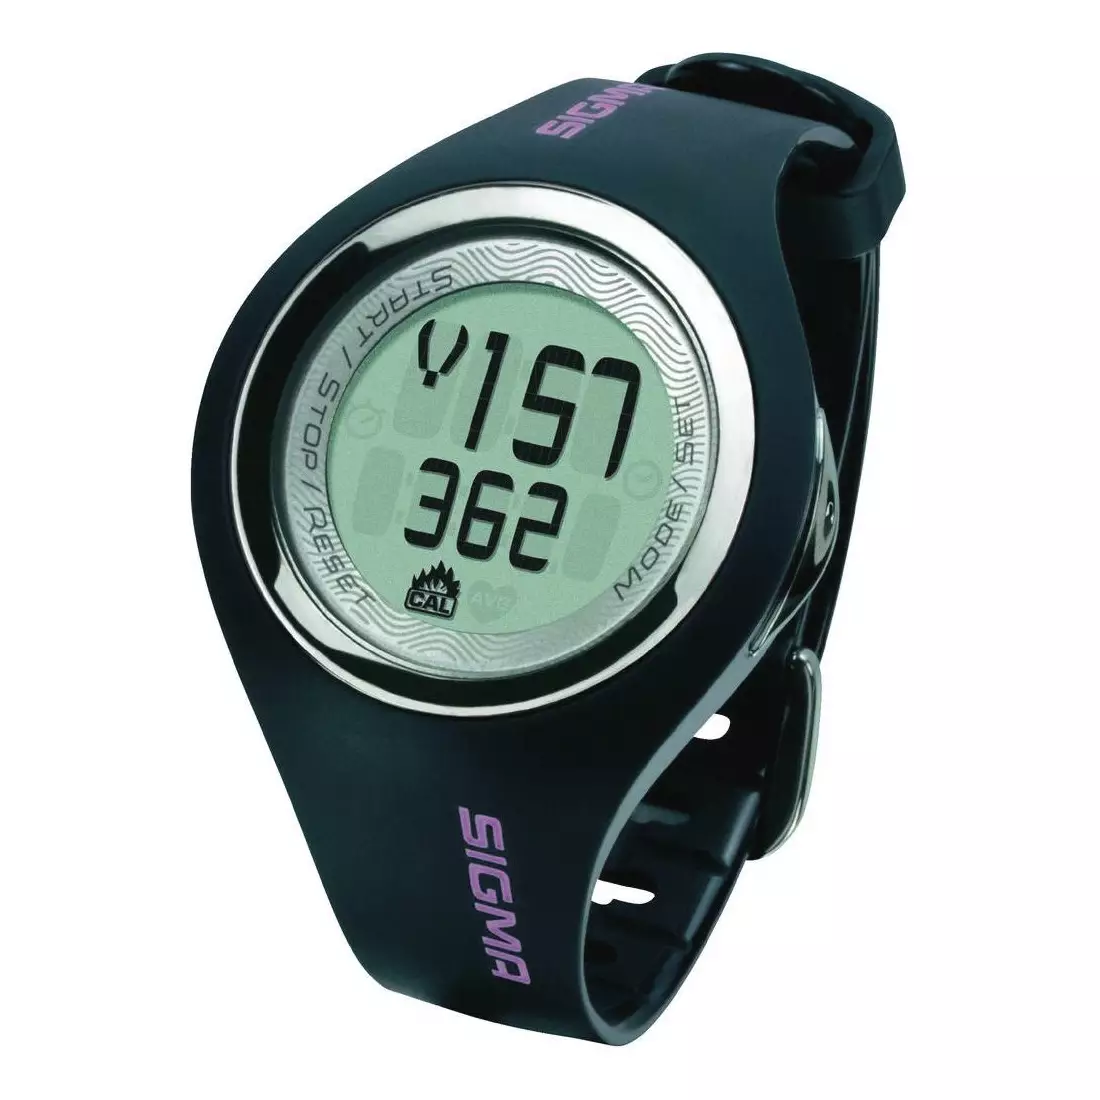 SIGMA sport PC 22.13 WOMAN heart rate monitor, gray and pink